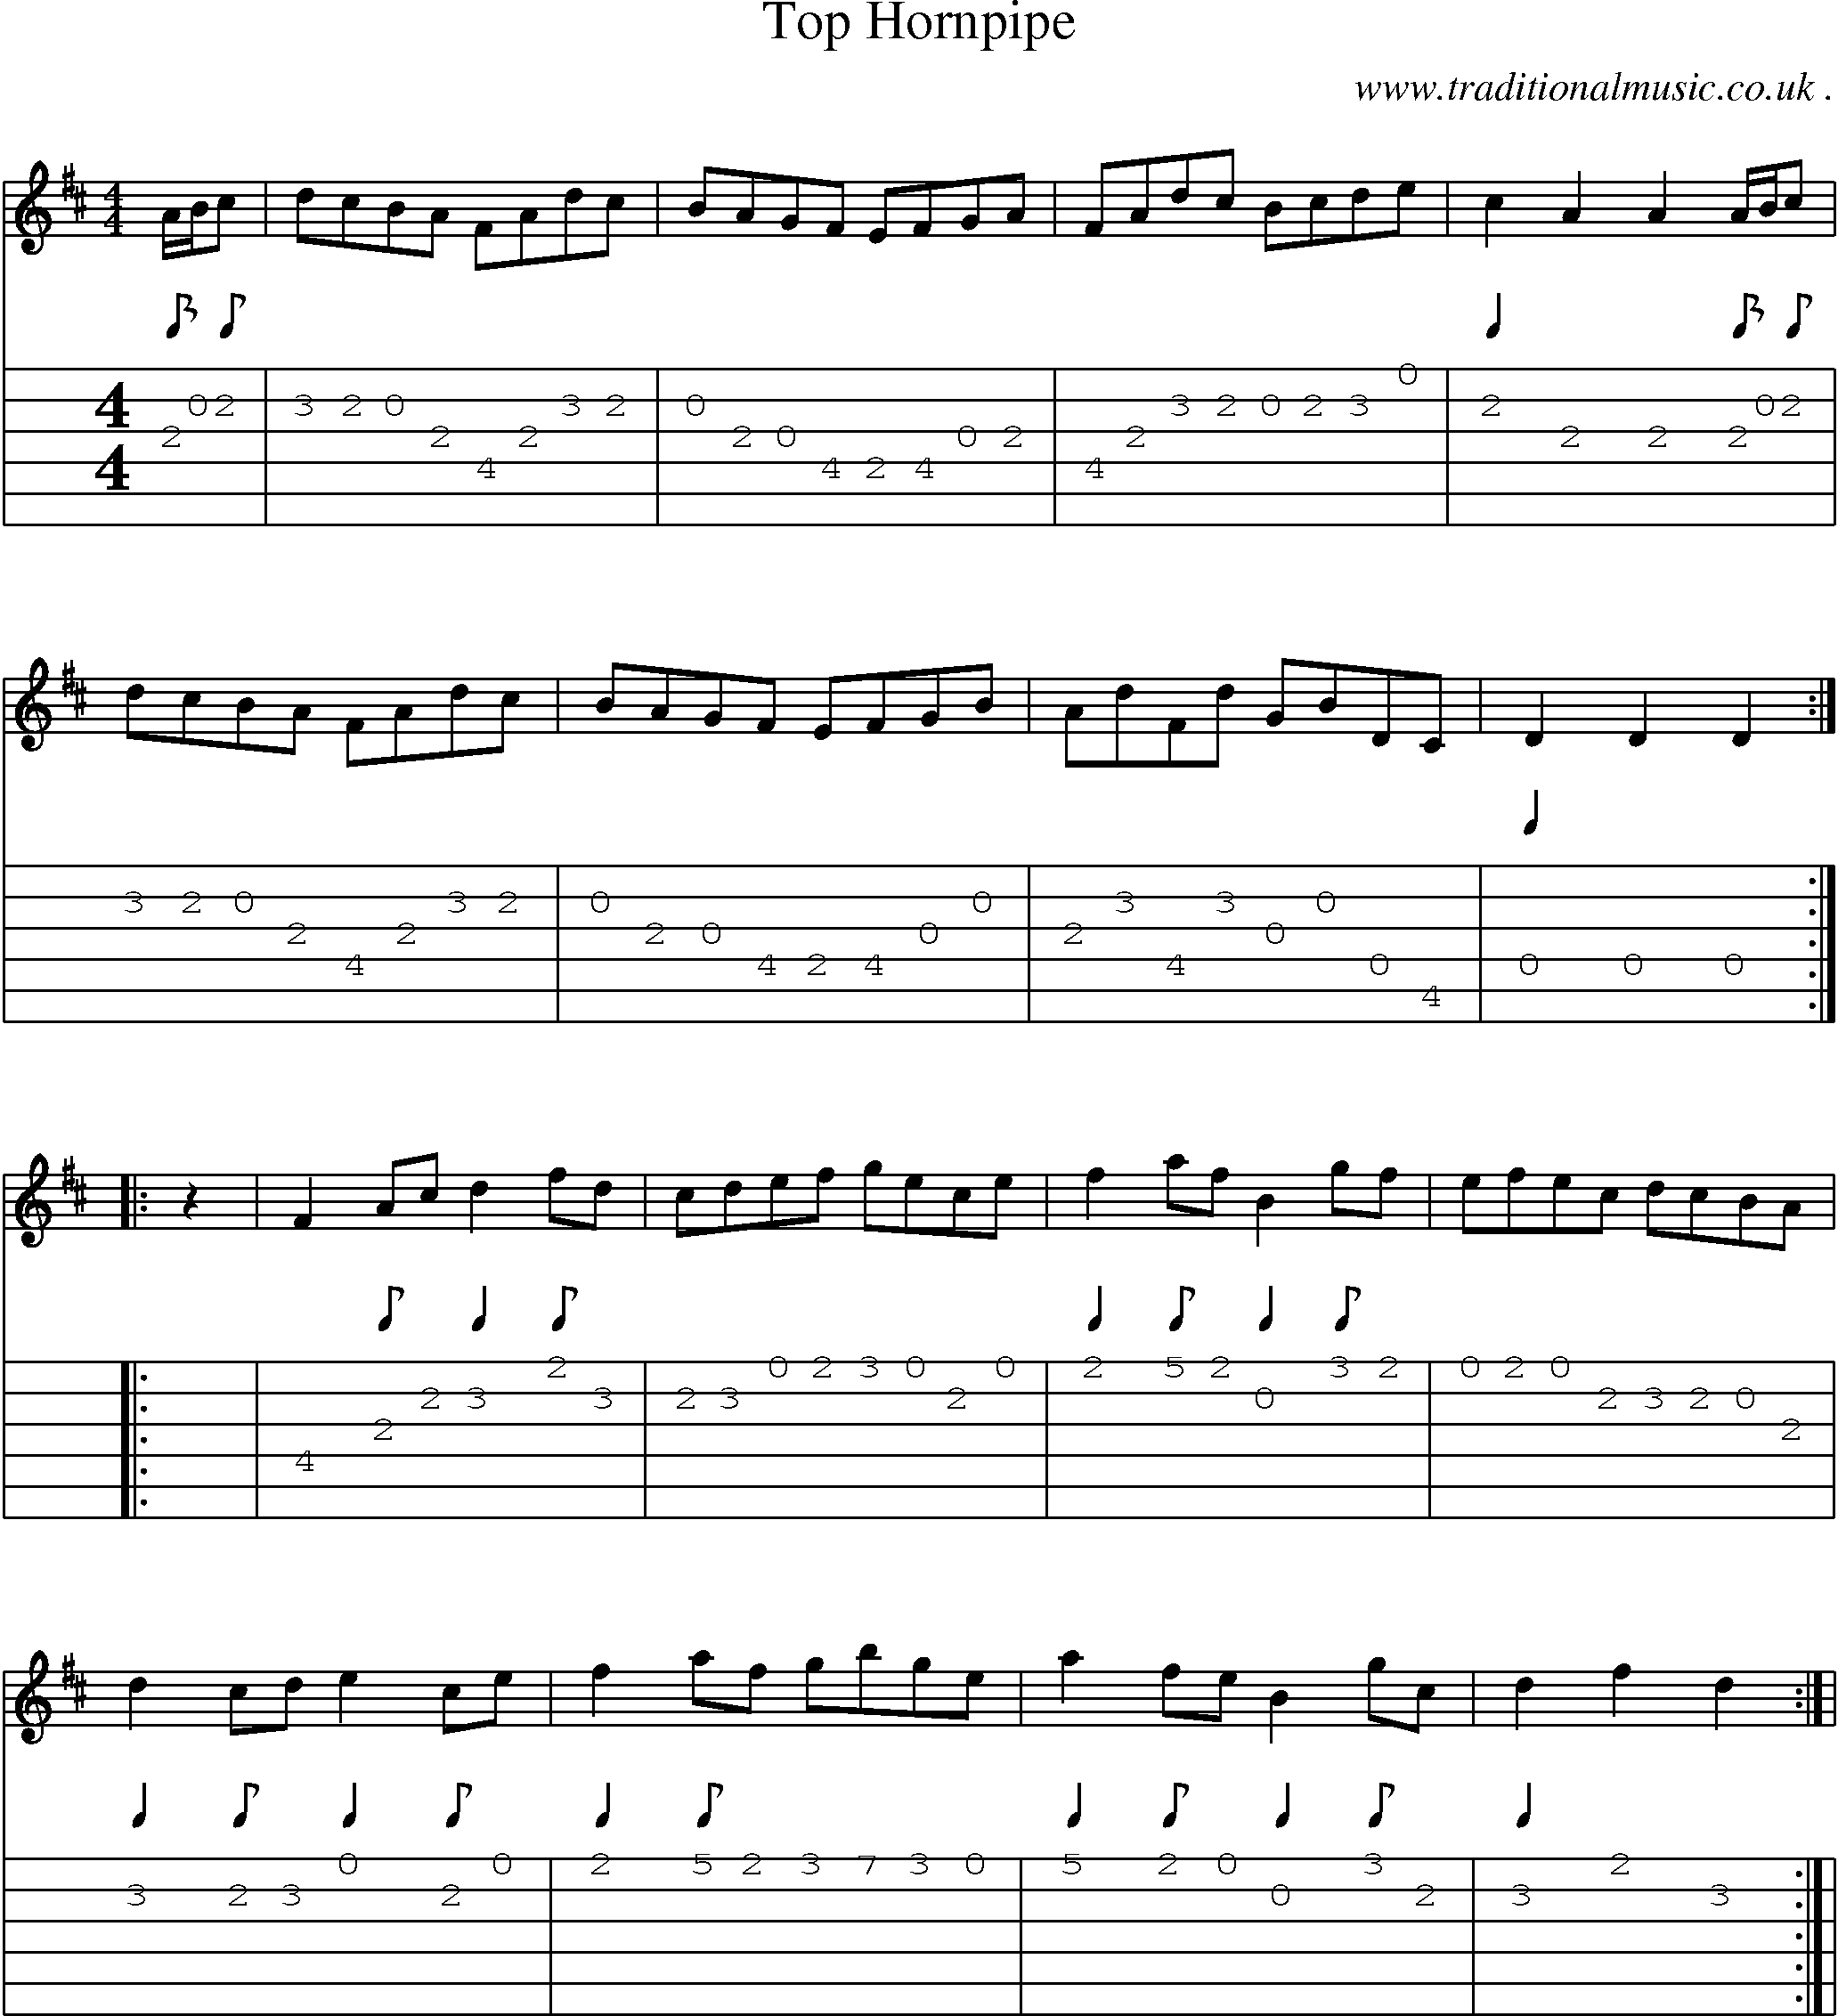 Sheet-Music and Guitar Tabs for Top Hornpipe